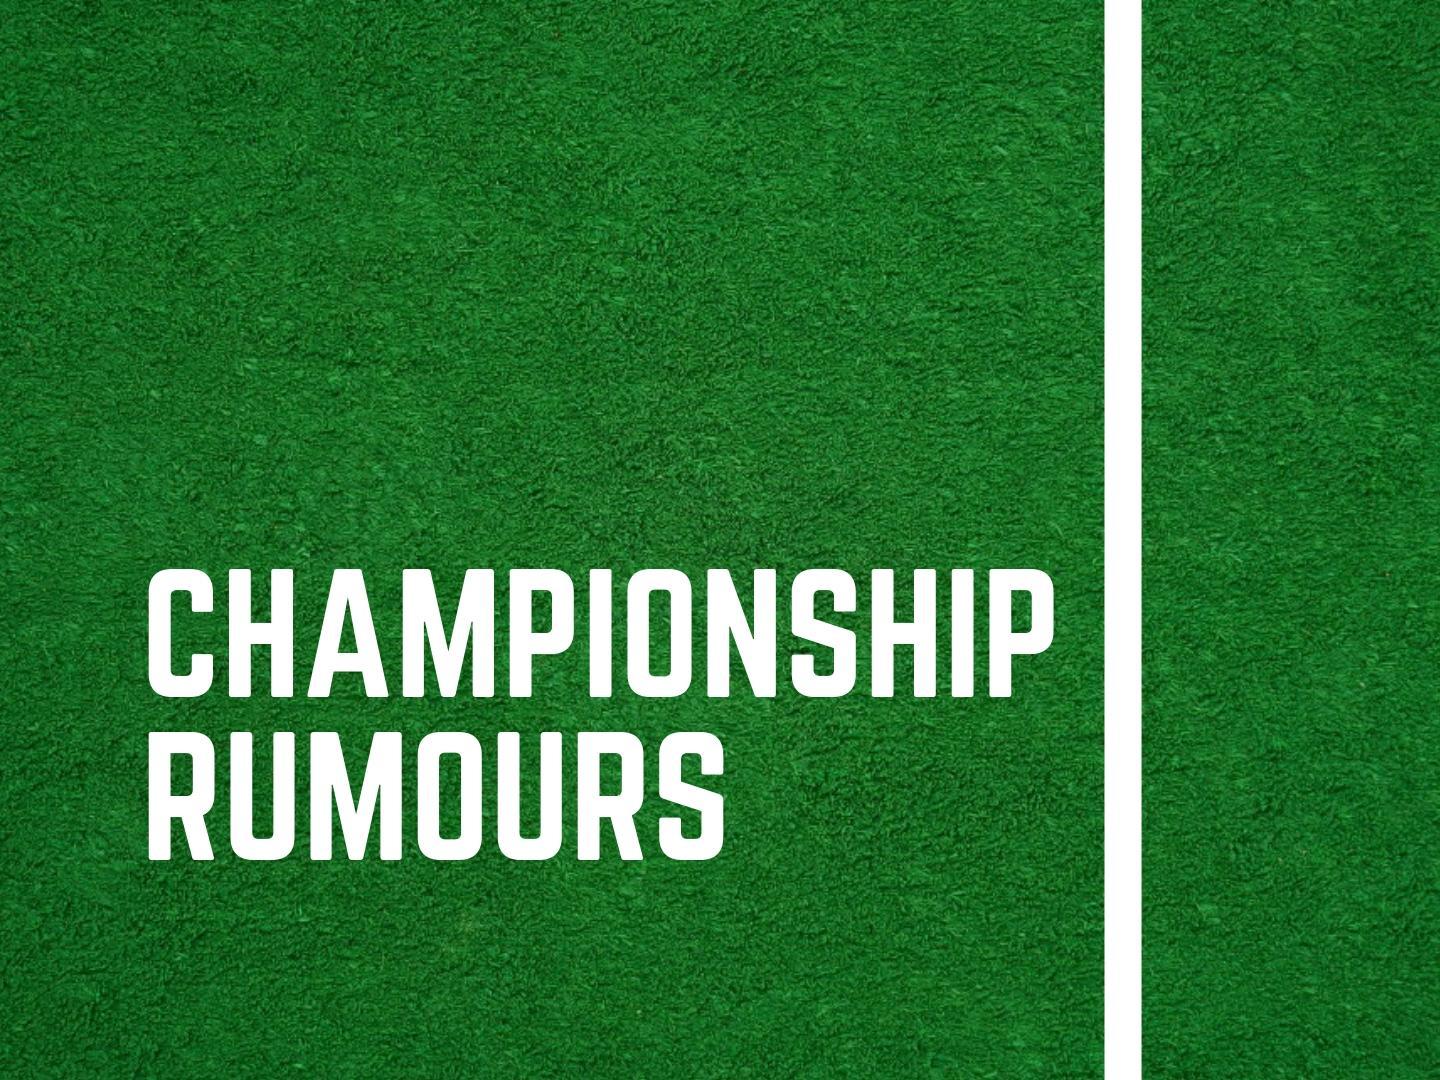 All the latest Championship rumours from around the web.